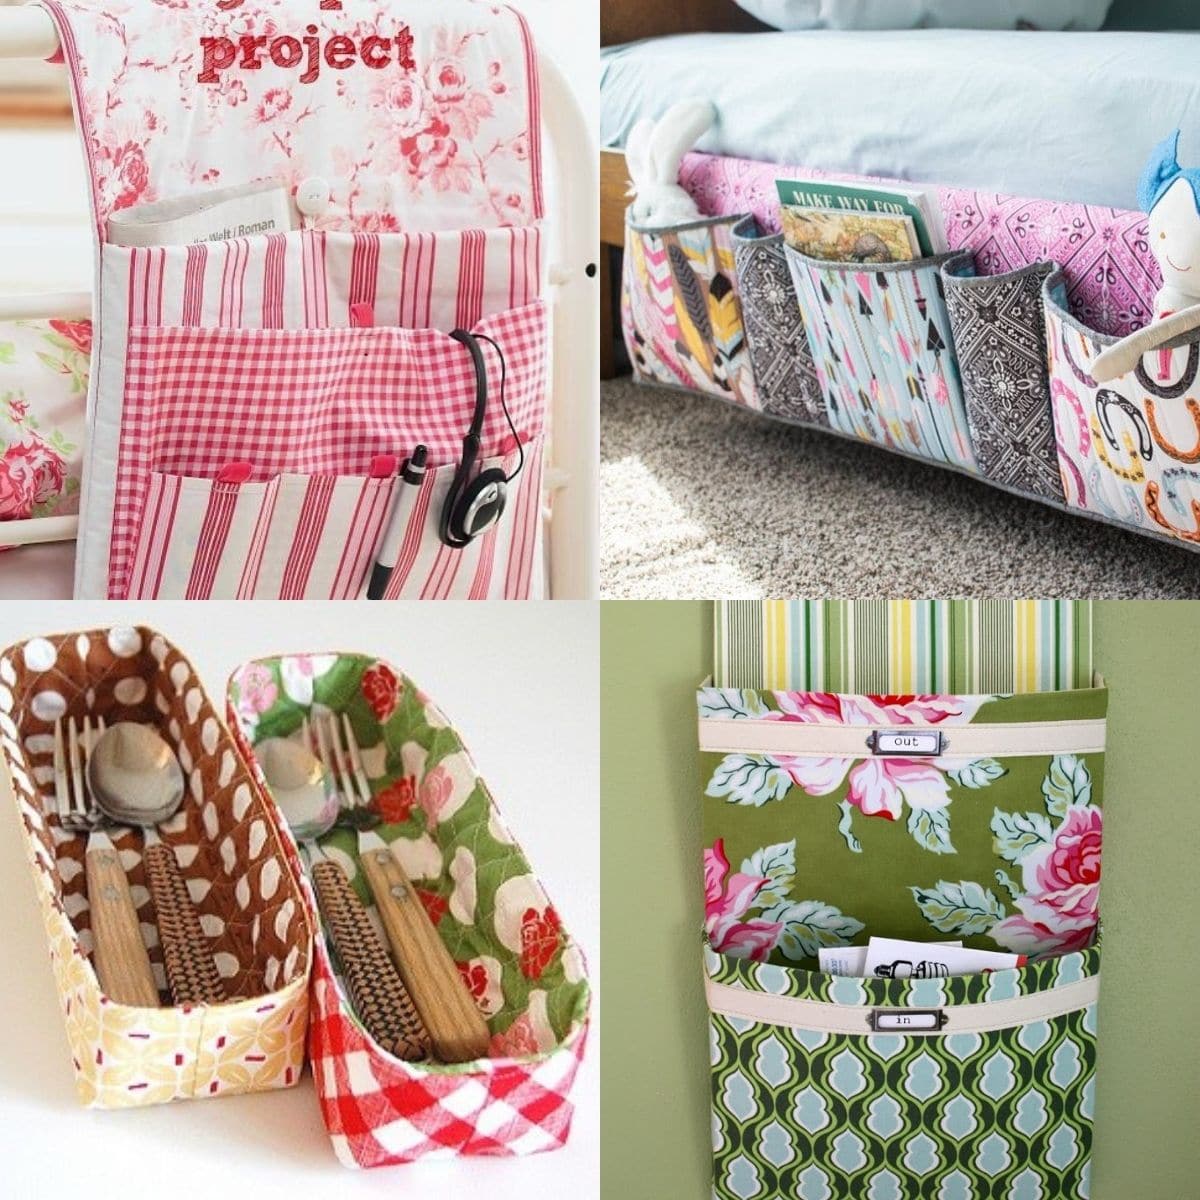 15 Sewing Projects to Make and Sell